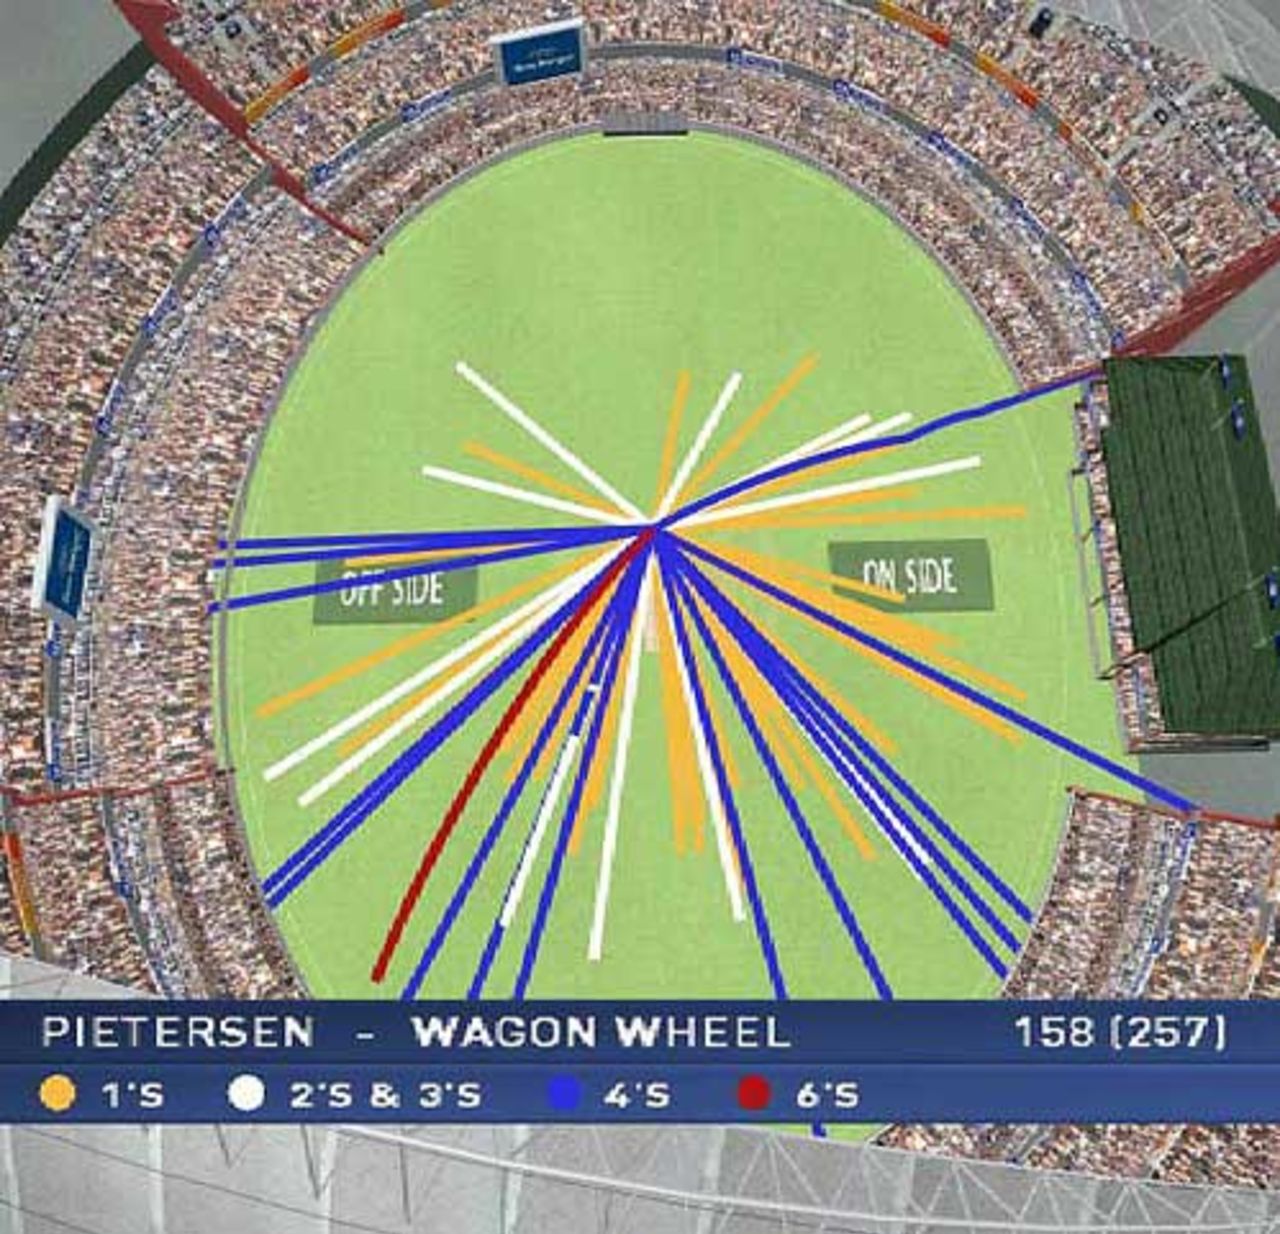 The wagon-wheel for Kevin Pietersen's 158, Australia v England, 2nd Test, Adelaide, 2nd day, December 2, 2006